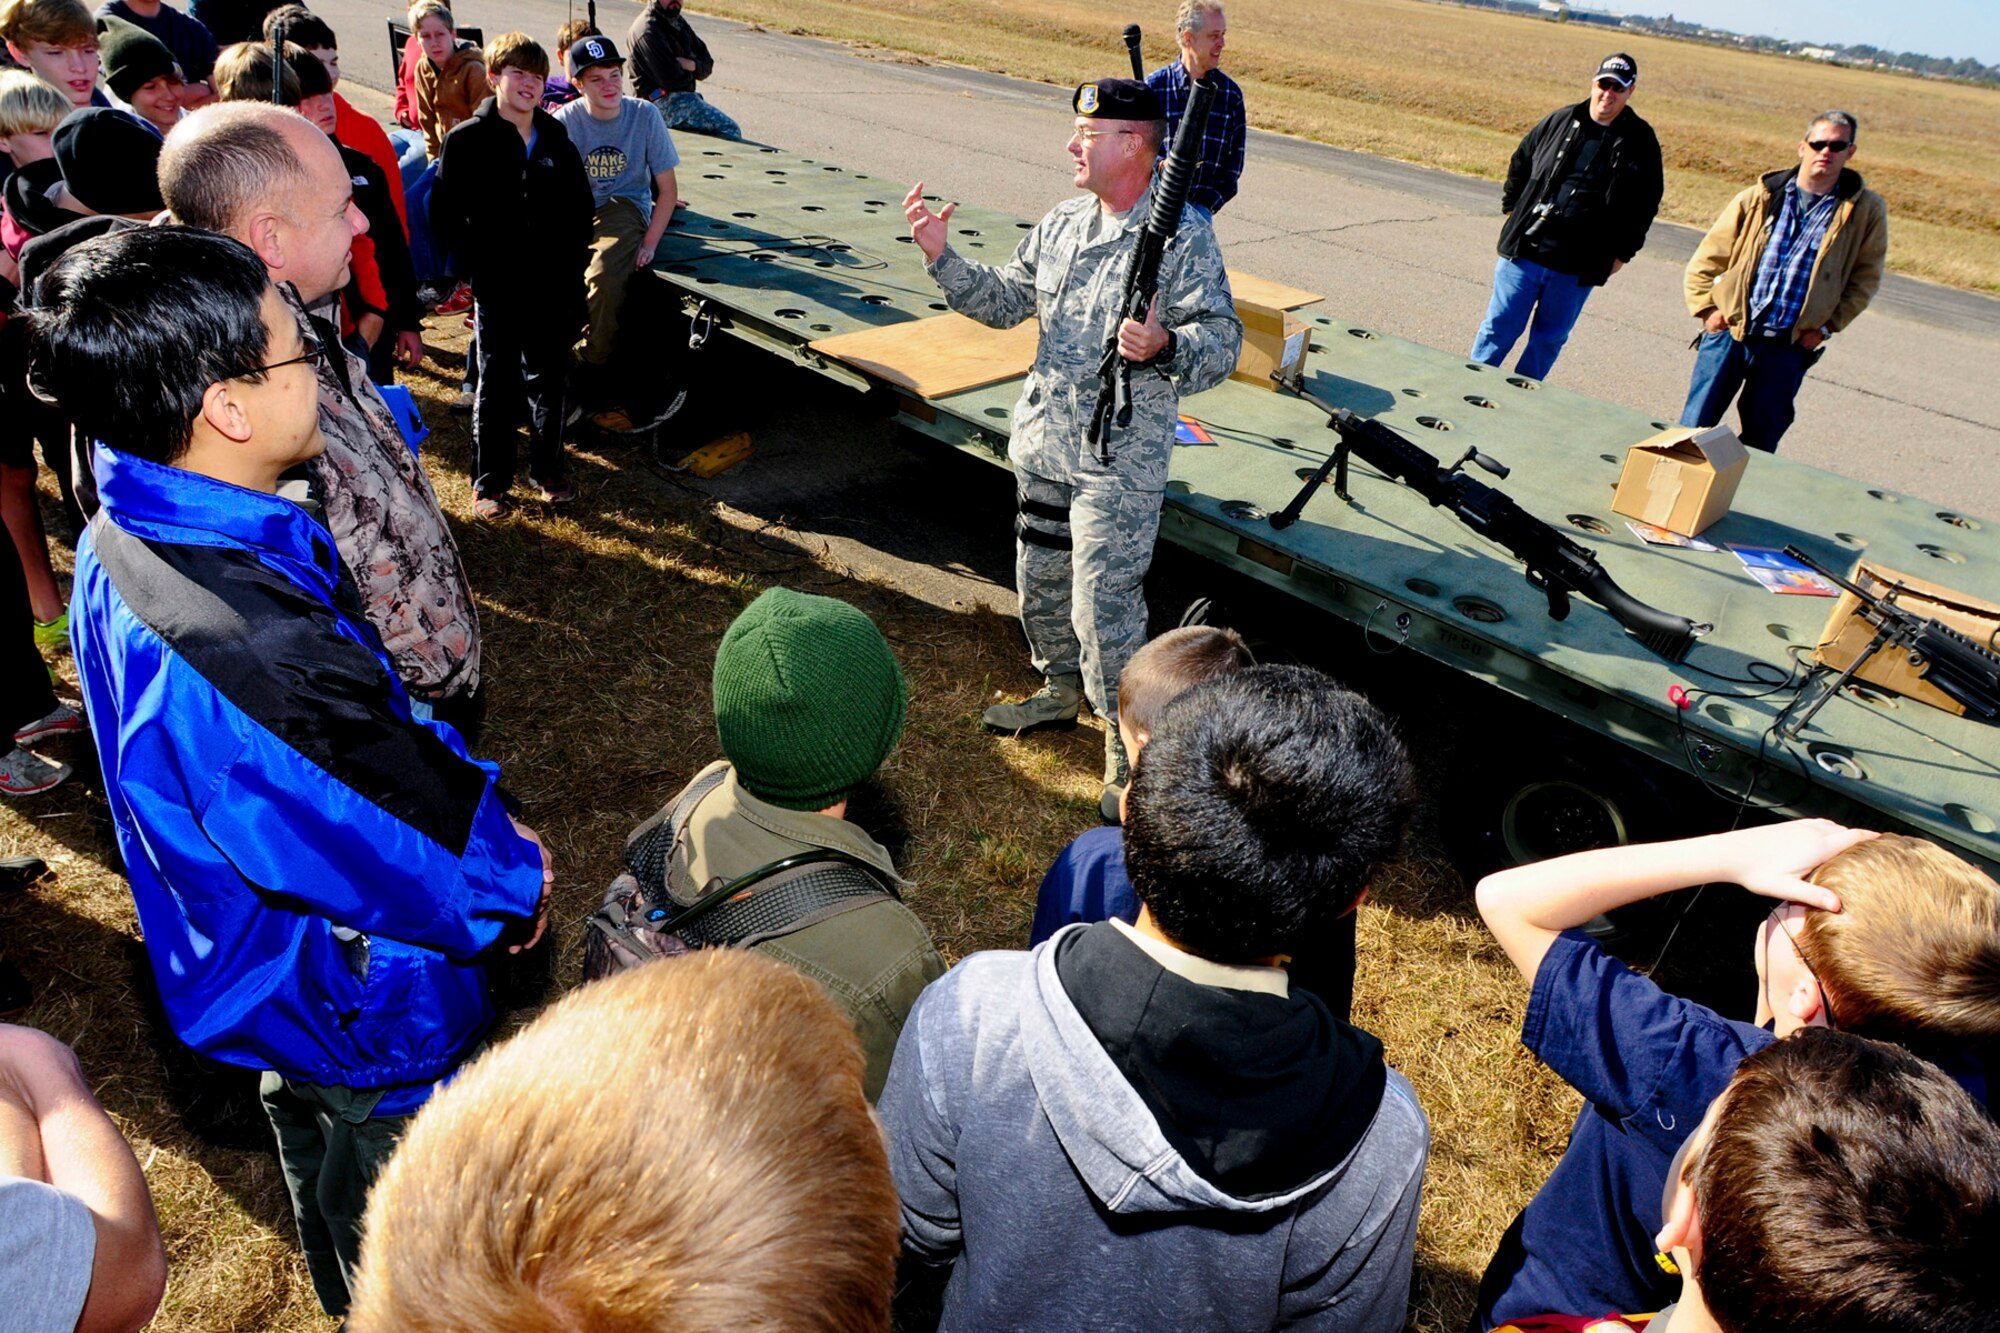 Senior Master Sgt. Ralph Guyton, 169th Security Forces Squadron, demonstrates the proper use of fire arms to boy scouts of America at McEntire Joint National Guard Base, S.C. , November 3, 2012. Guyton demonstration was to assist the boy scouts in earning merit badge. The base hosted the Indian Waters Council Boy Scouts Camporee and supported the event with Army and Air National Guard static displays, recruiters and demonstration from medical, security, emergency management and fire department. (SCANG photo by Staff Sgt. Jorge Intriago/Released) 